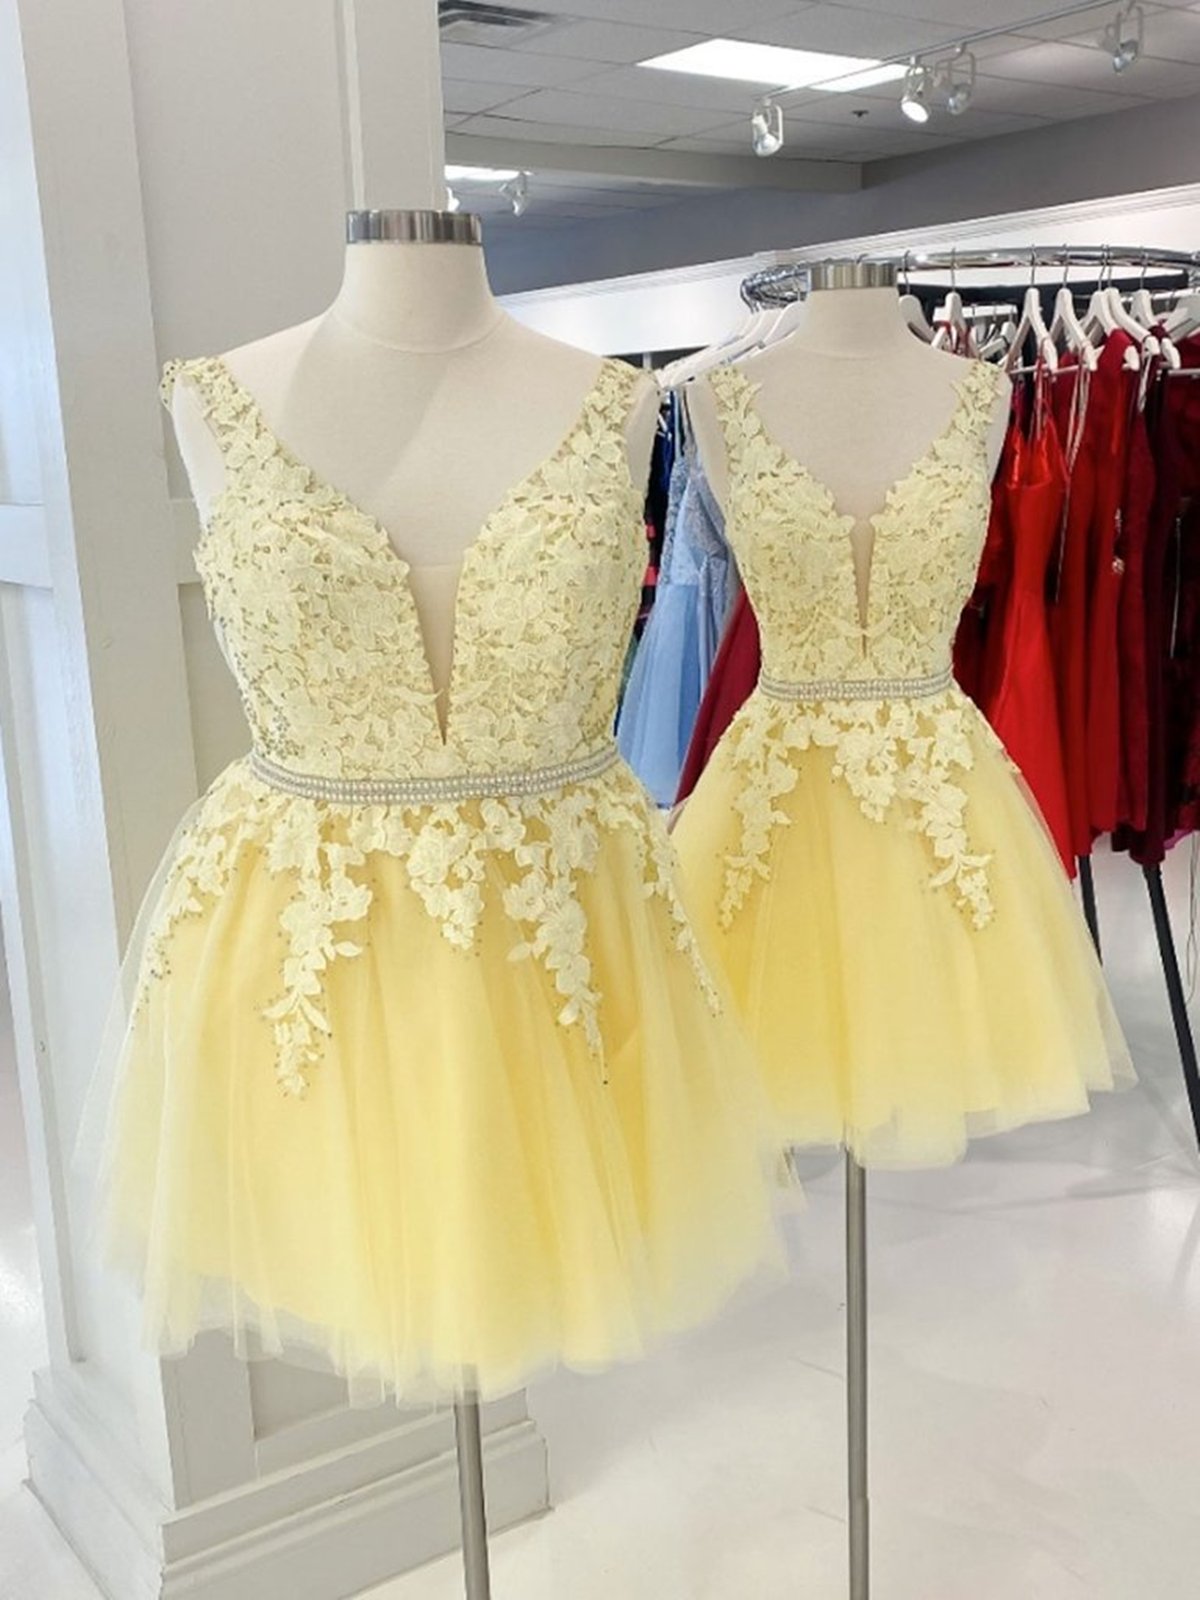 A Line V Neck Short Yellow Lace Prom Dresses For Black girls For Women, Short Yellow Lace Graduation Homecoming Dresses